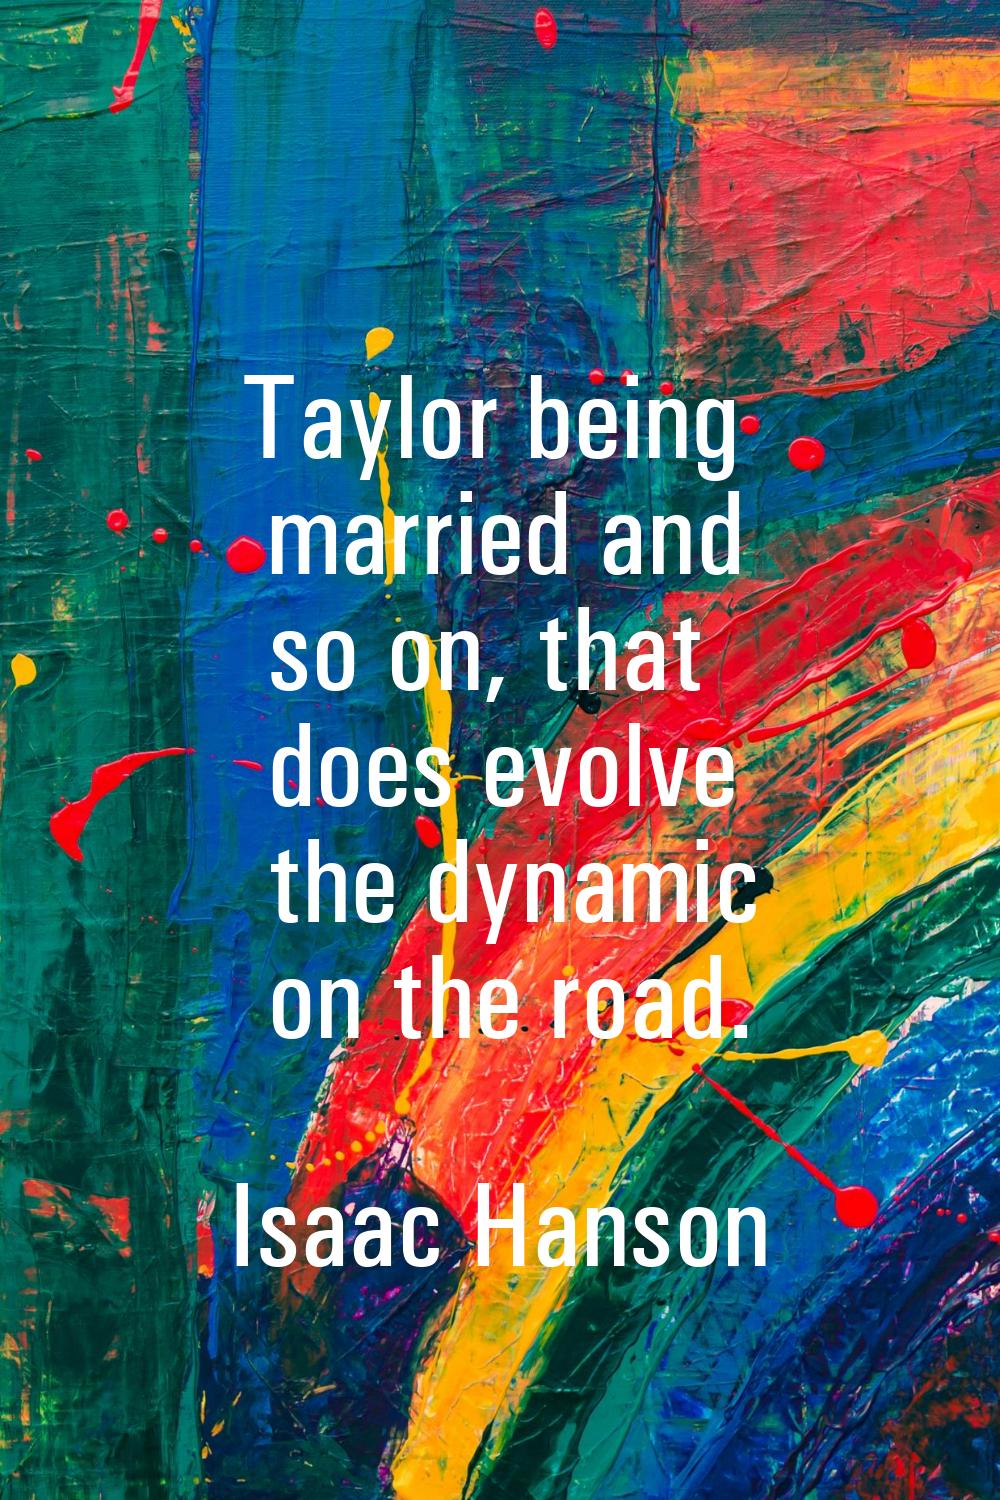 Taylor being married and so on, that does evolve the dynamic on the road.